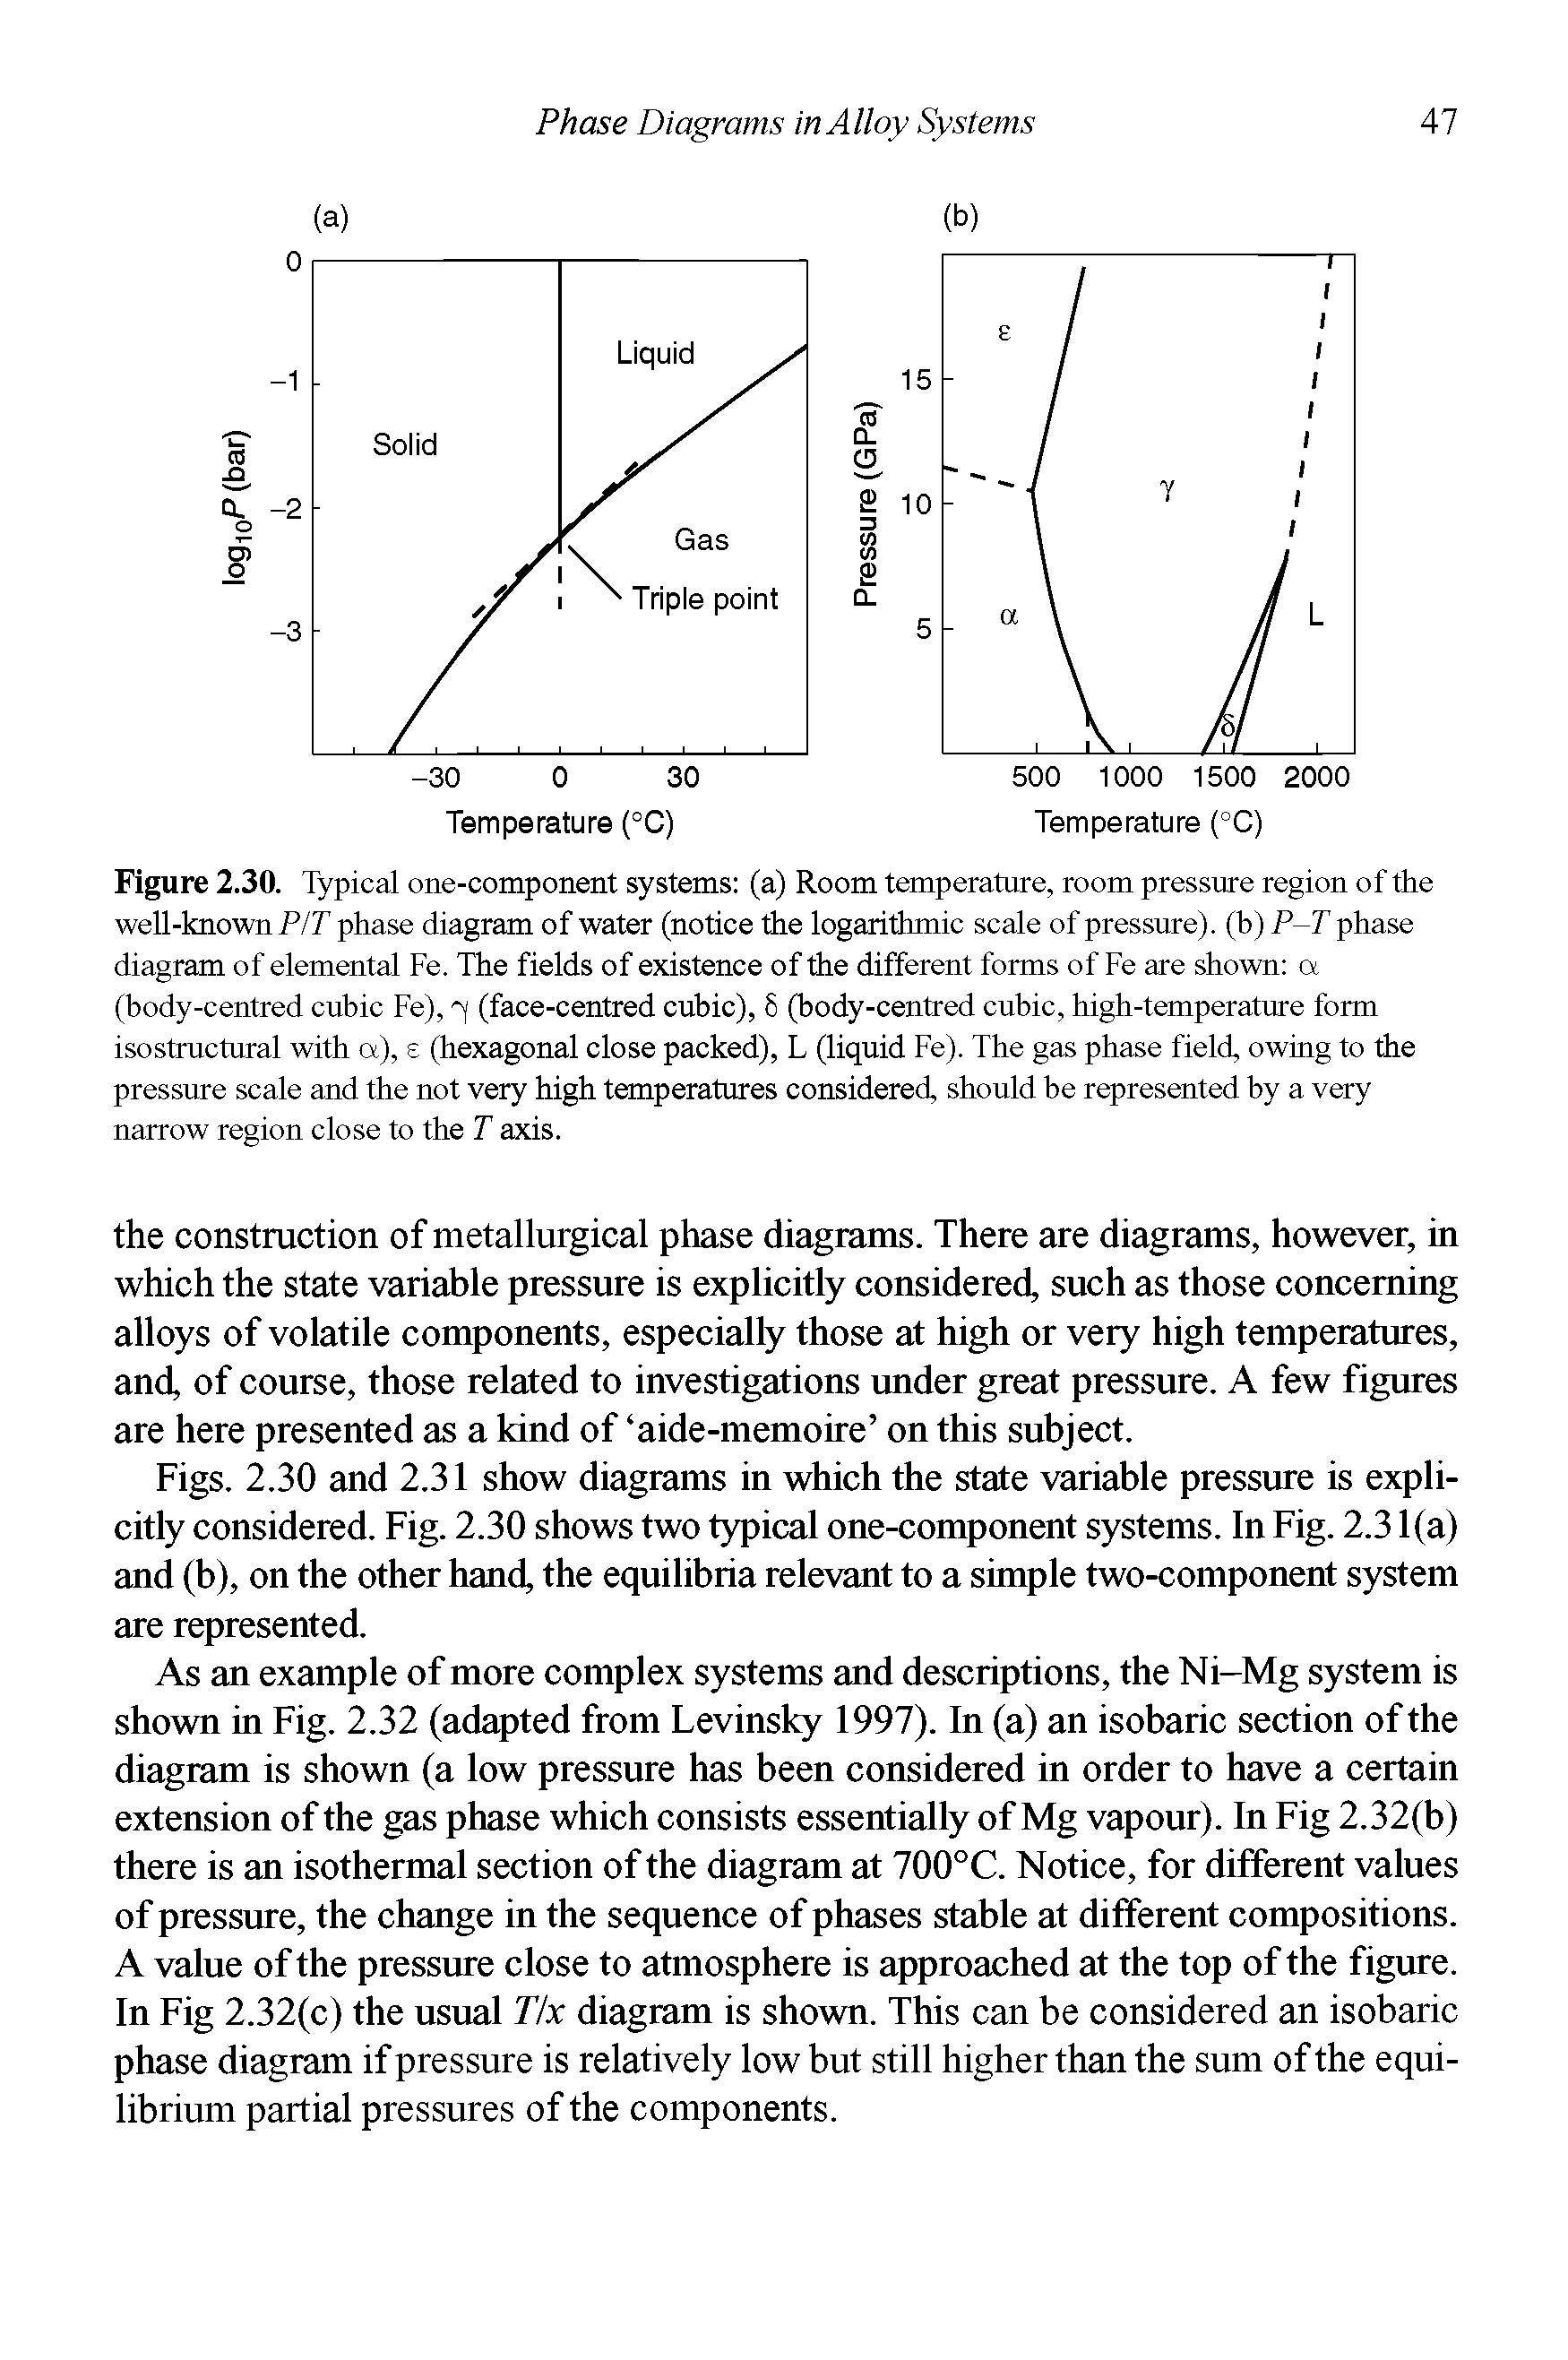 Figure 2.30. Typical one-component systems (a) Room temperature, room pressure region of the well-known PIT phase diagram of water (notice the logarithmic scale of pressure), (b) P-T phase diagram of elemental Fe. The fields of existence of the different forms of Fe are shown a (body-centred cubic Fe), (face-centred cubic), 6 (body-centred cubic, high-temperature form isostructural with a), e (hexagonal close packed), L (liquid Fe). The gas phase field, owing to the pressure scale and the not very high temperatures considered, should be represented by a very narrow region close to the T axis.